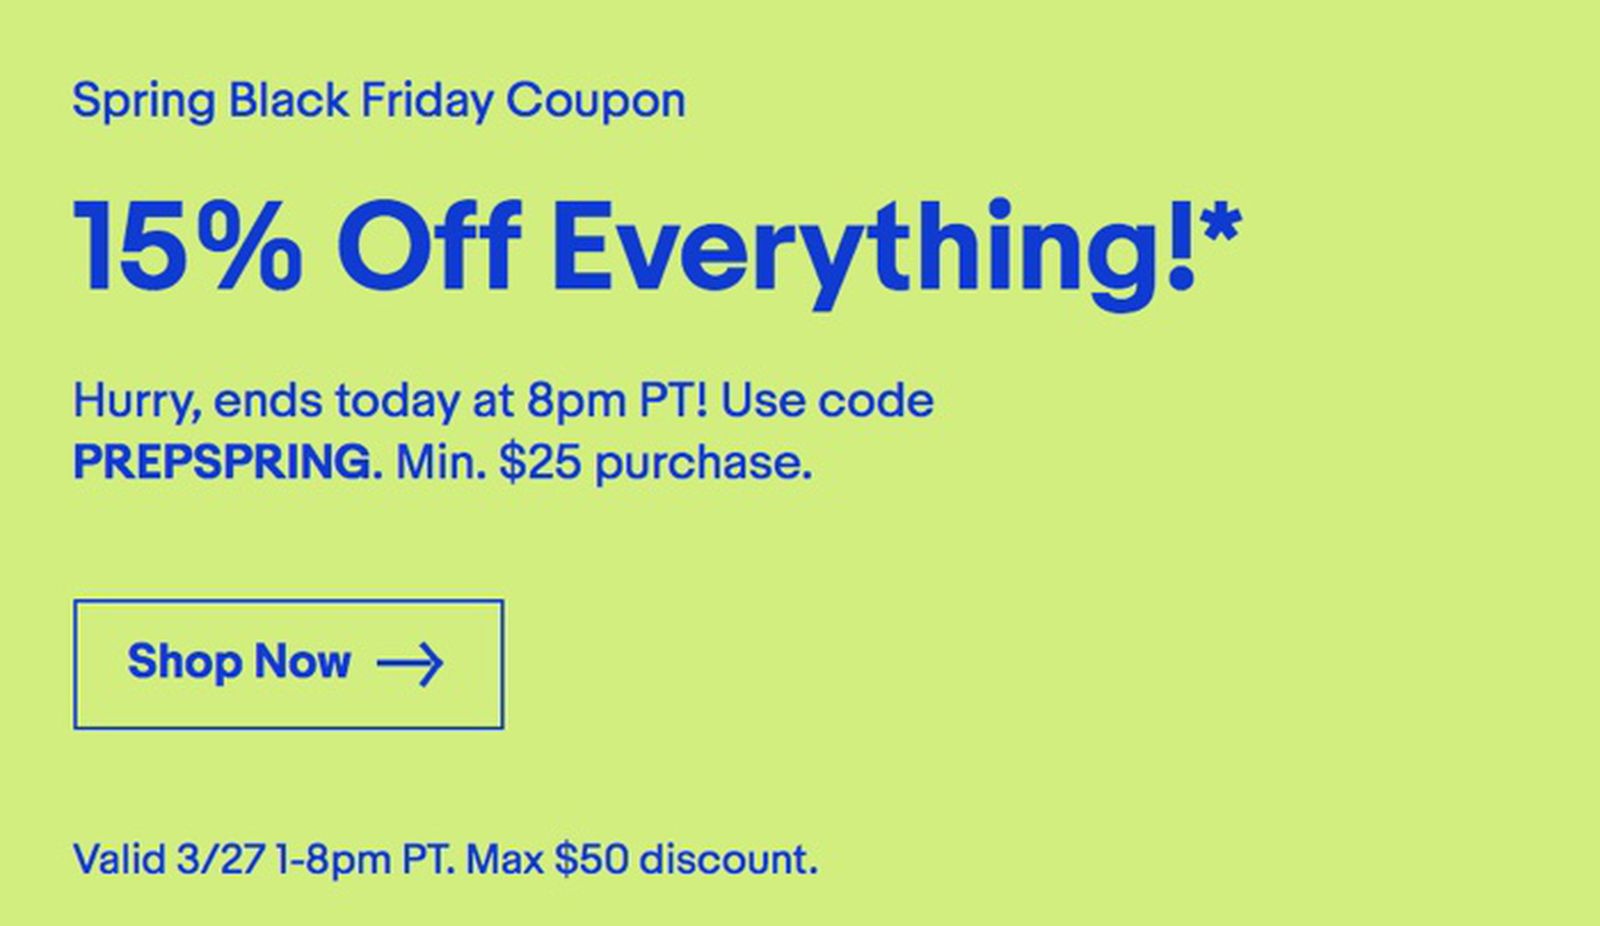 ebay-shares-another-spring-savings-coupon-with-15-off-almost